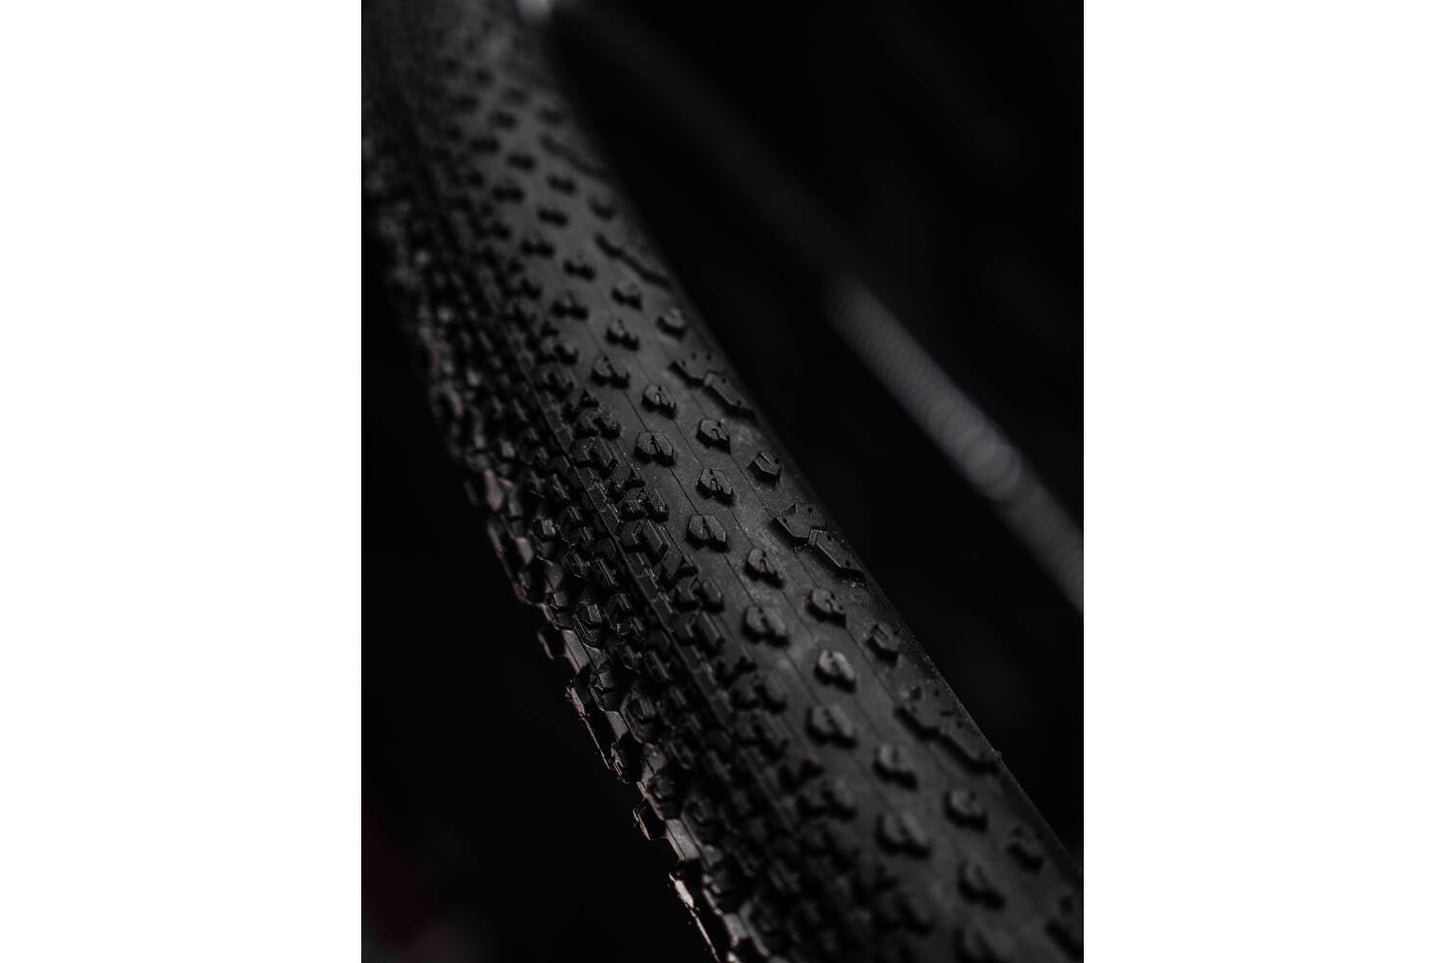 Connettore Goodyear Ultimate TLC 700X50C